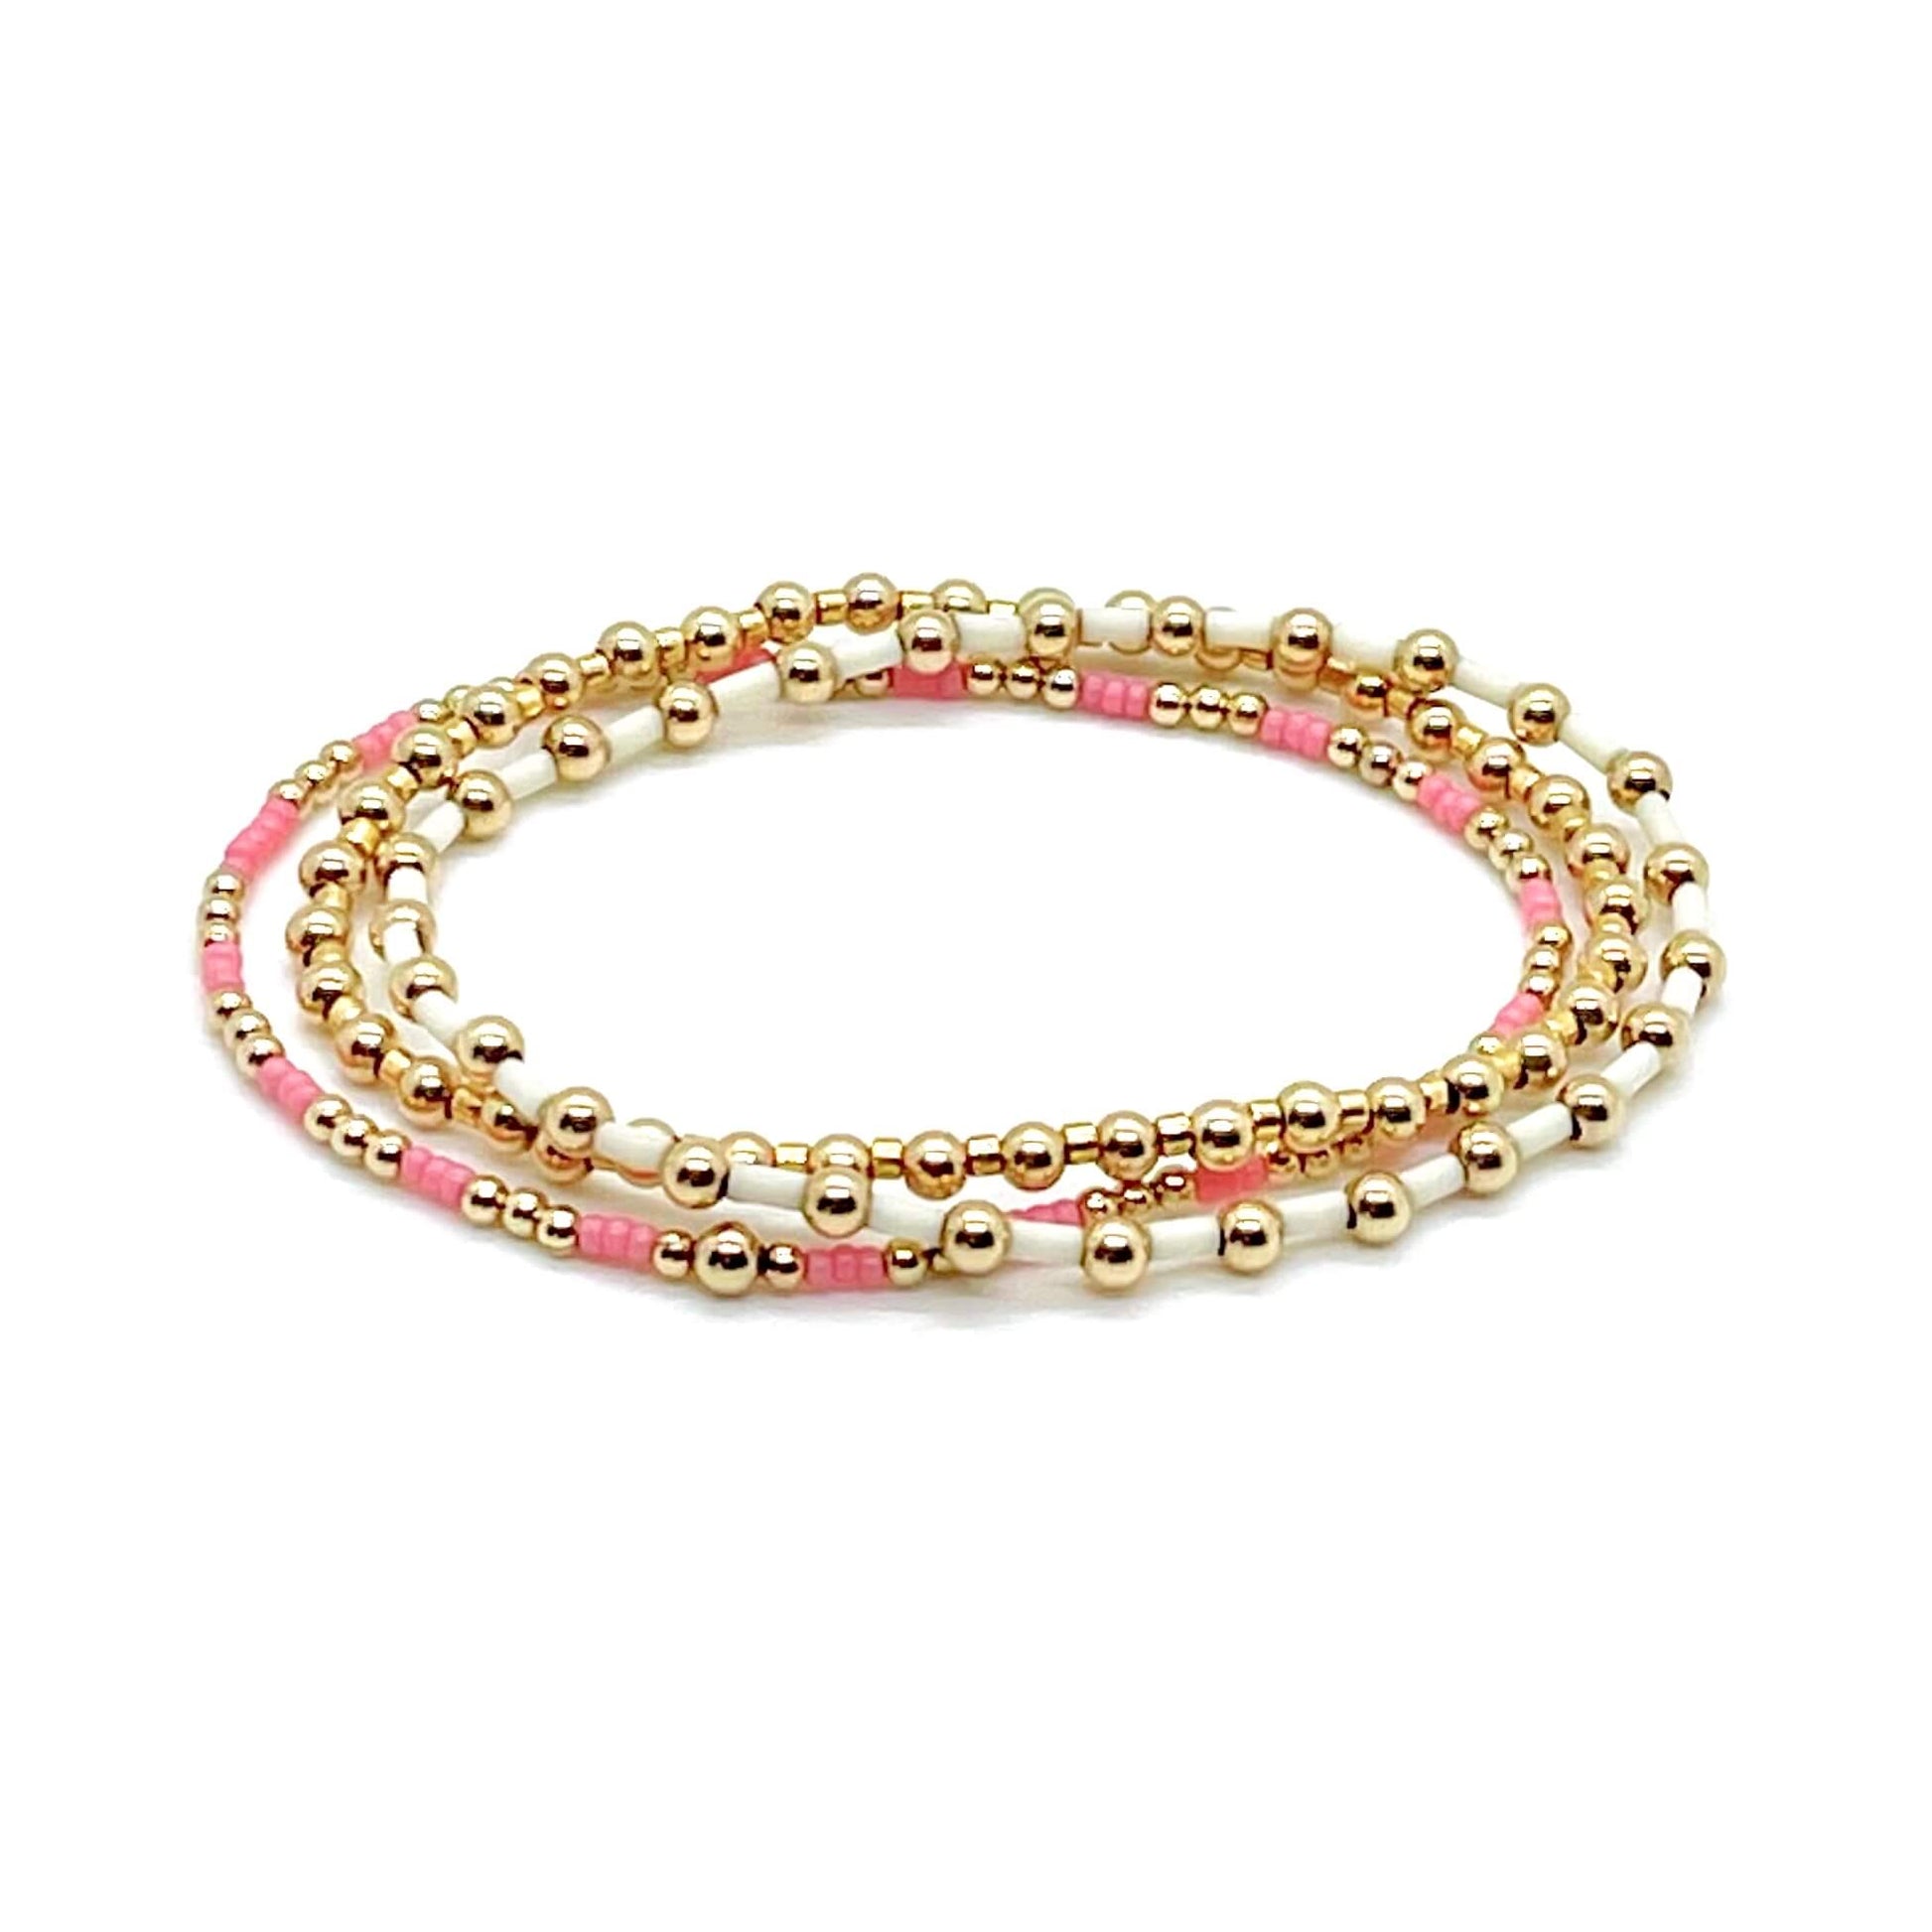 Pink and gold bracelet set with three 14k gold filled bead bracelets with alternating seed beads.